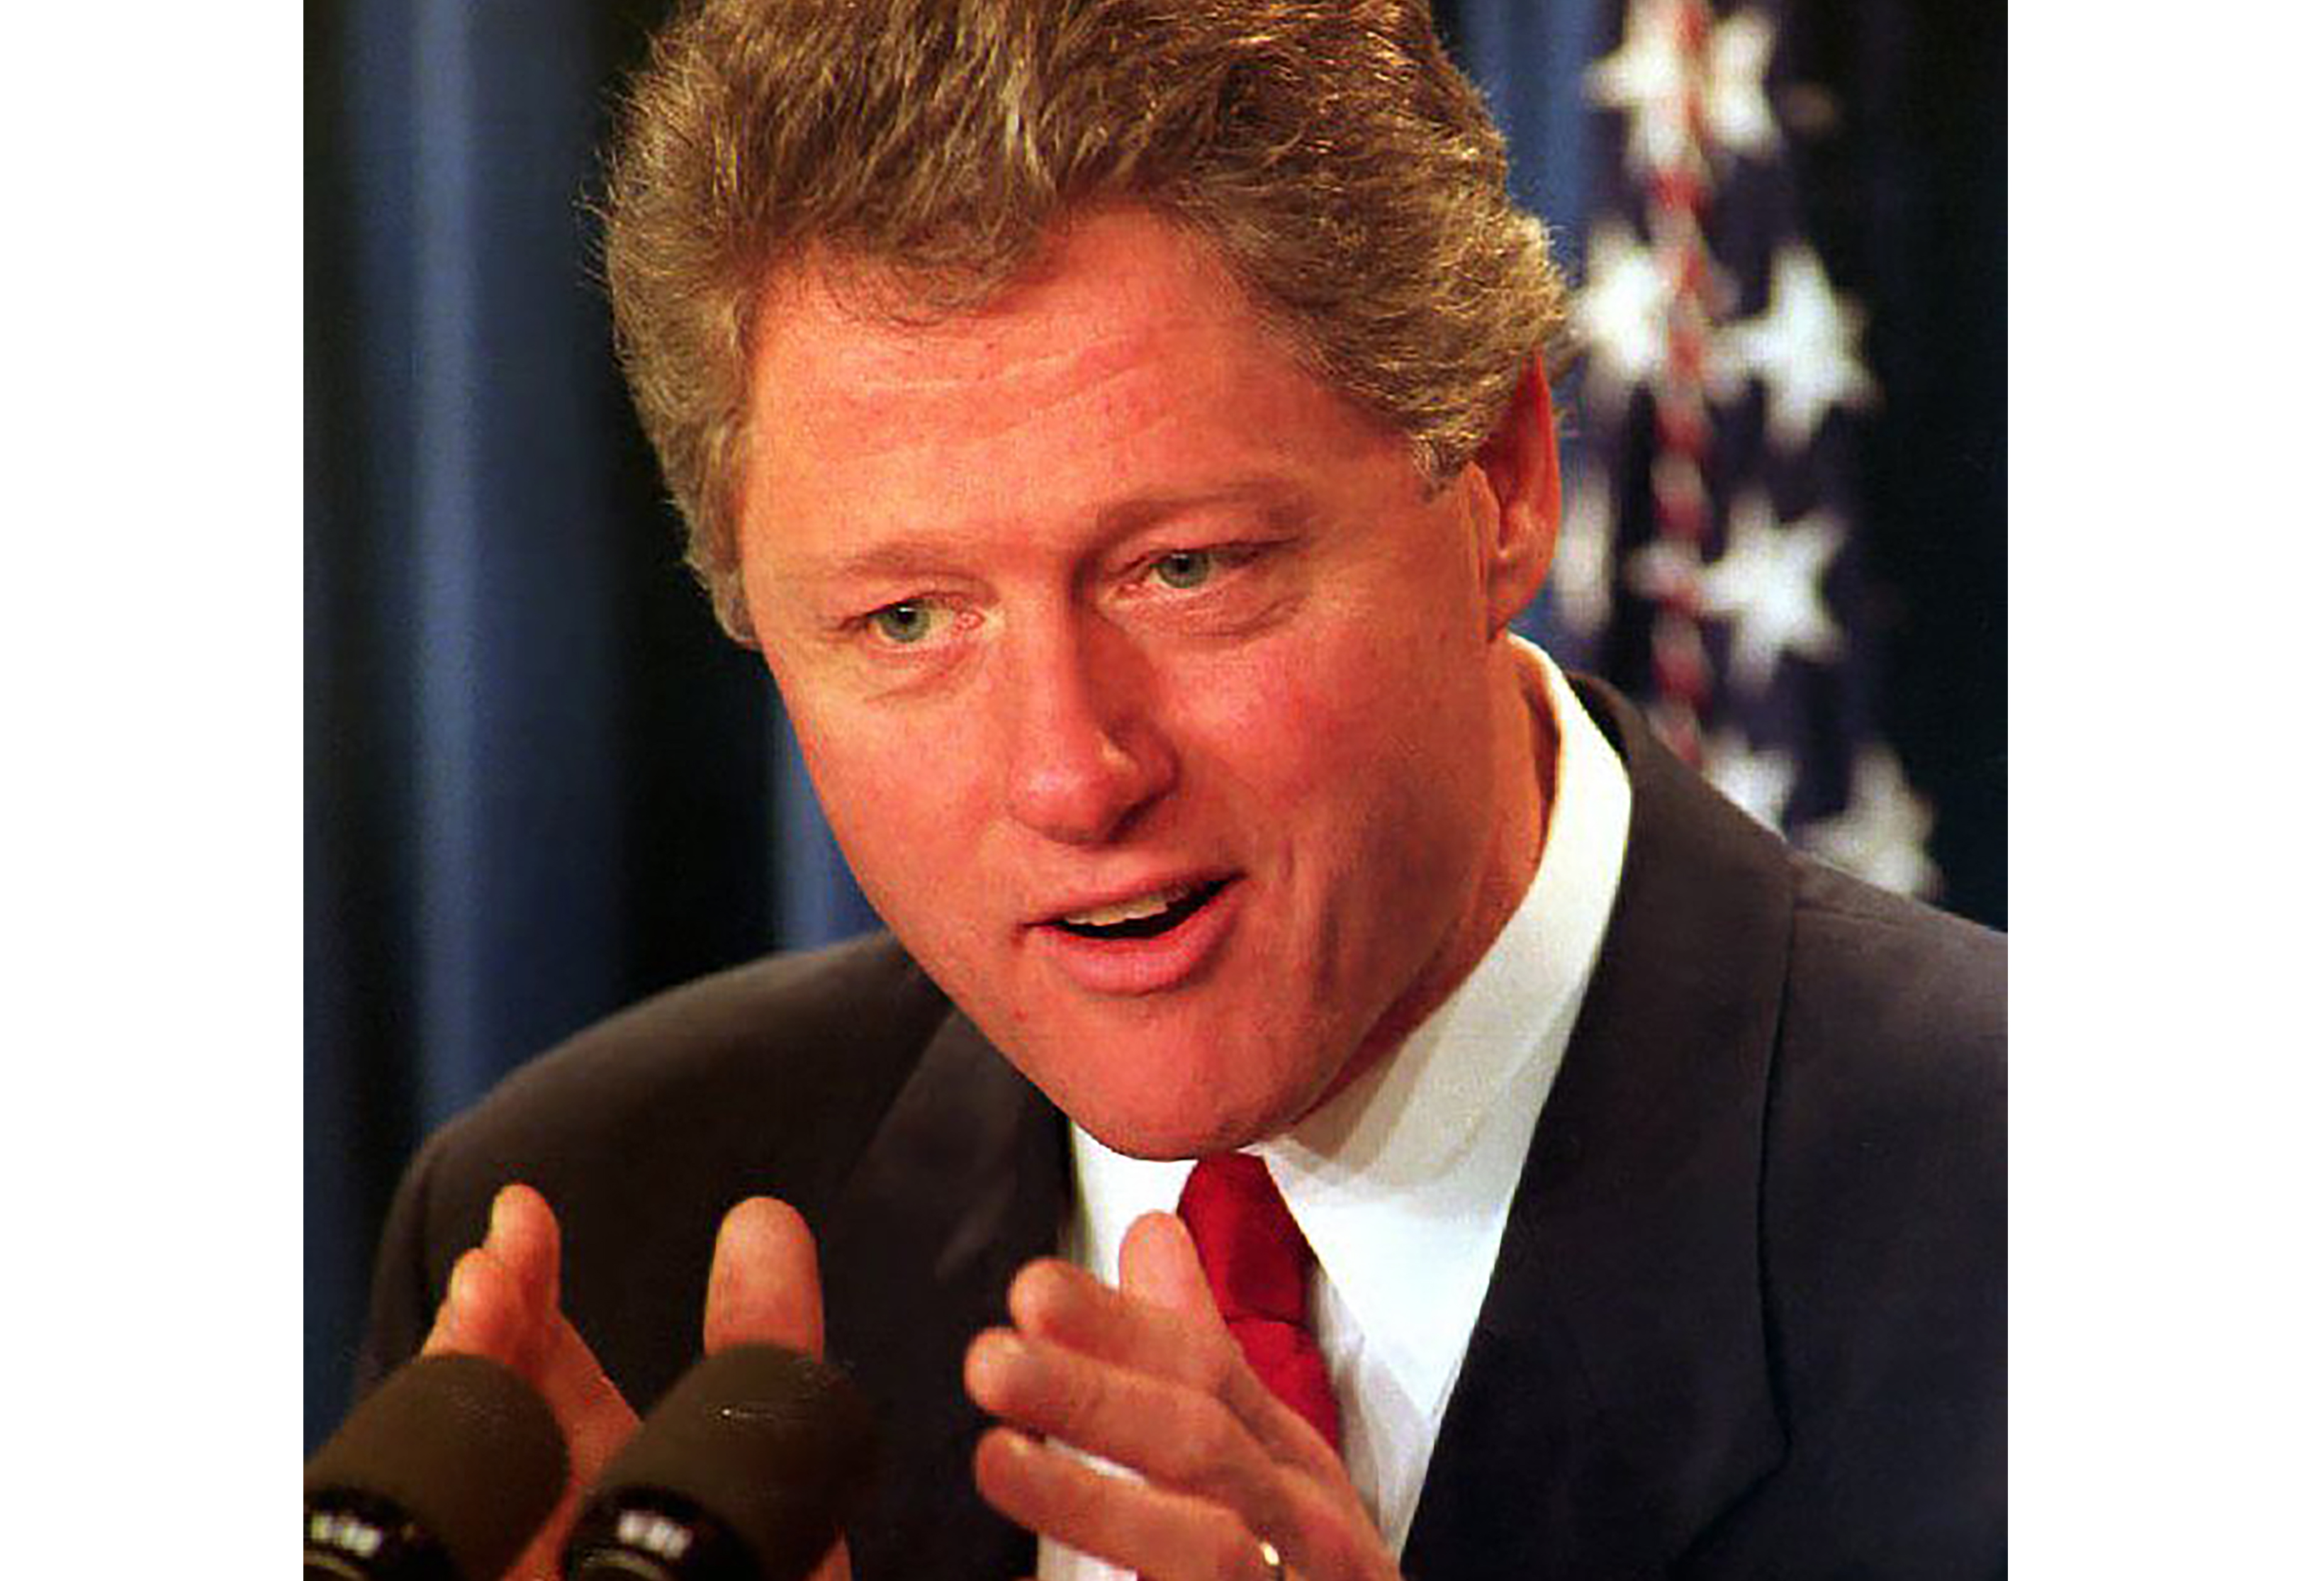 U.S. President Bill Clinton addresses the nation about his decision to lift a 50-year ban on homosexuals in the military on January 29, 1993. (DAVID AKE—AFP/Getty Images)